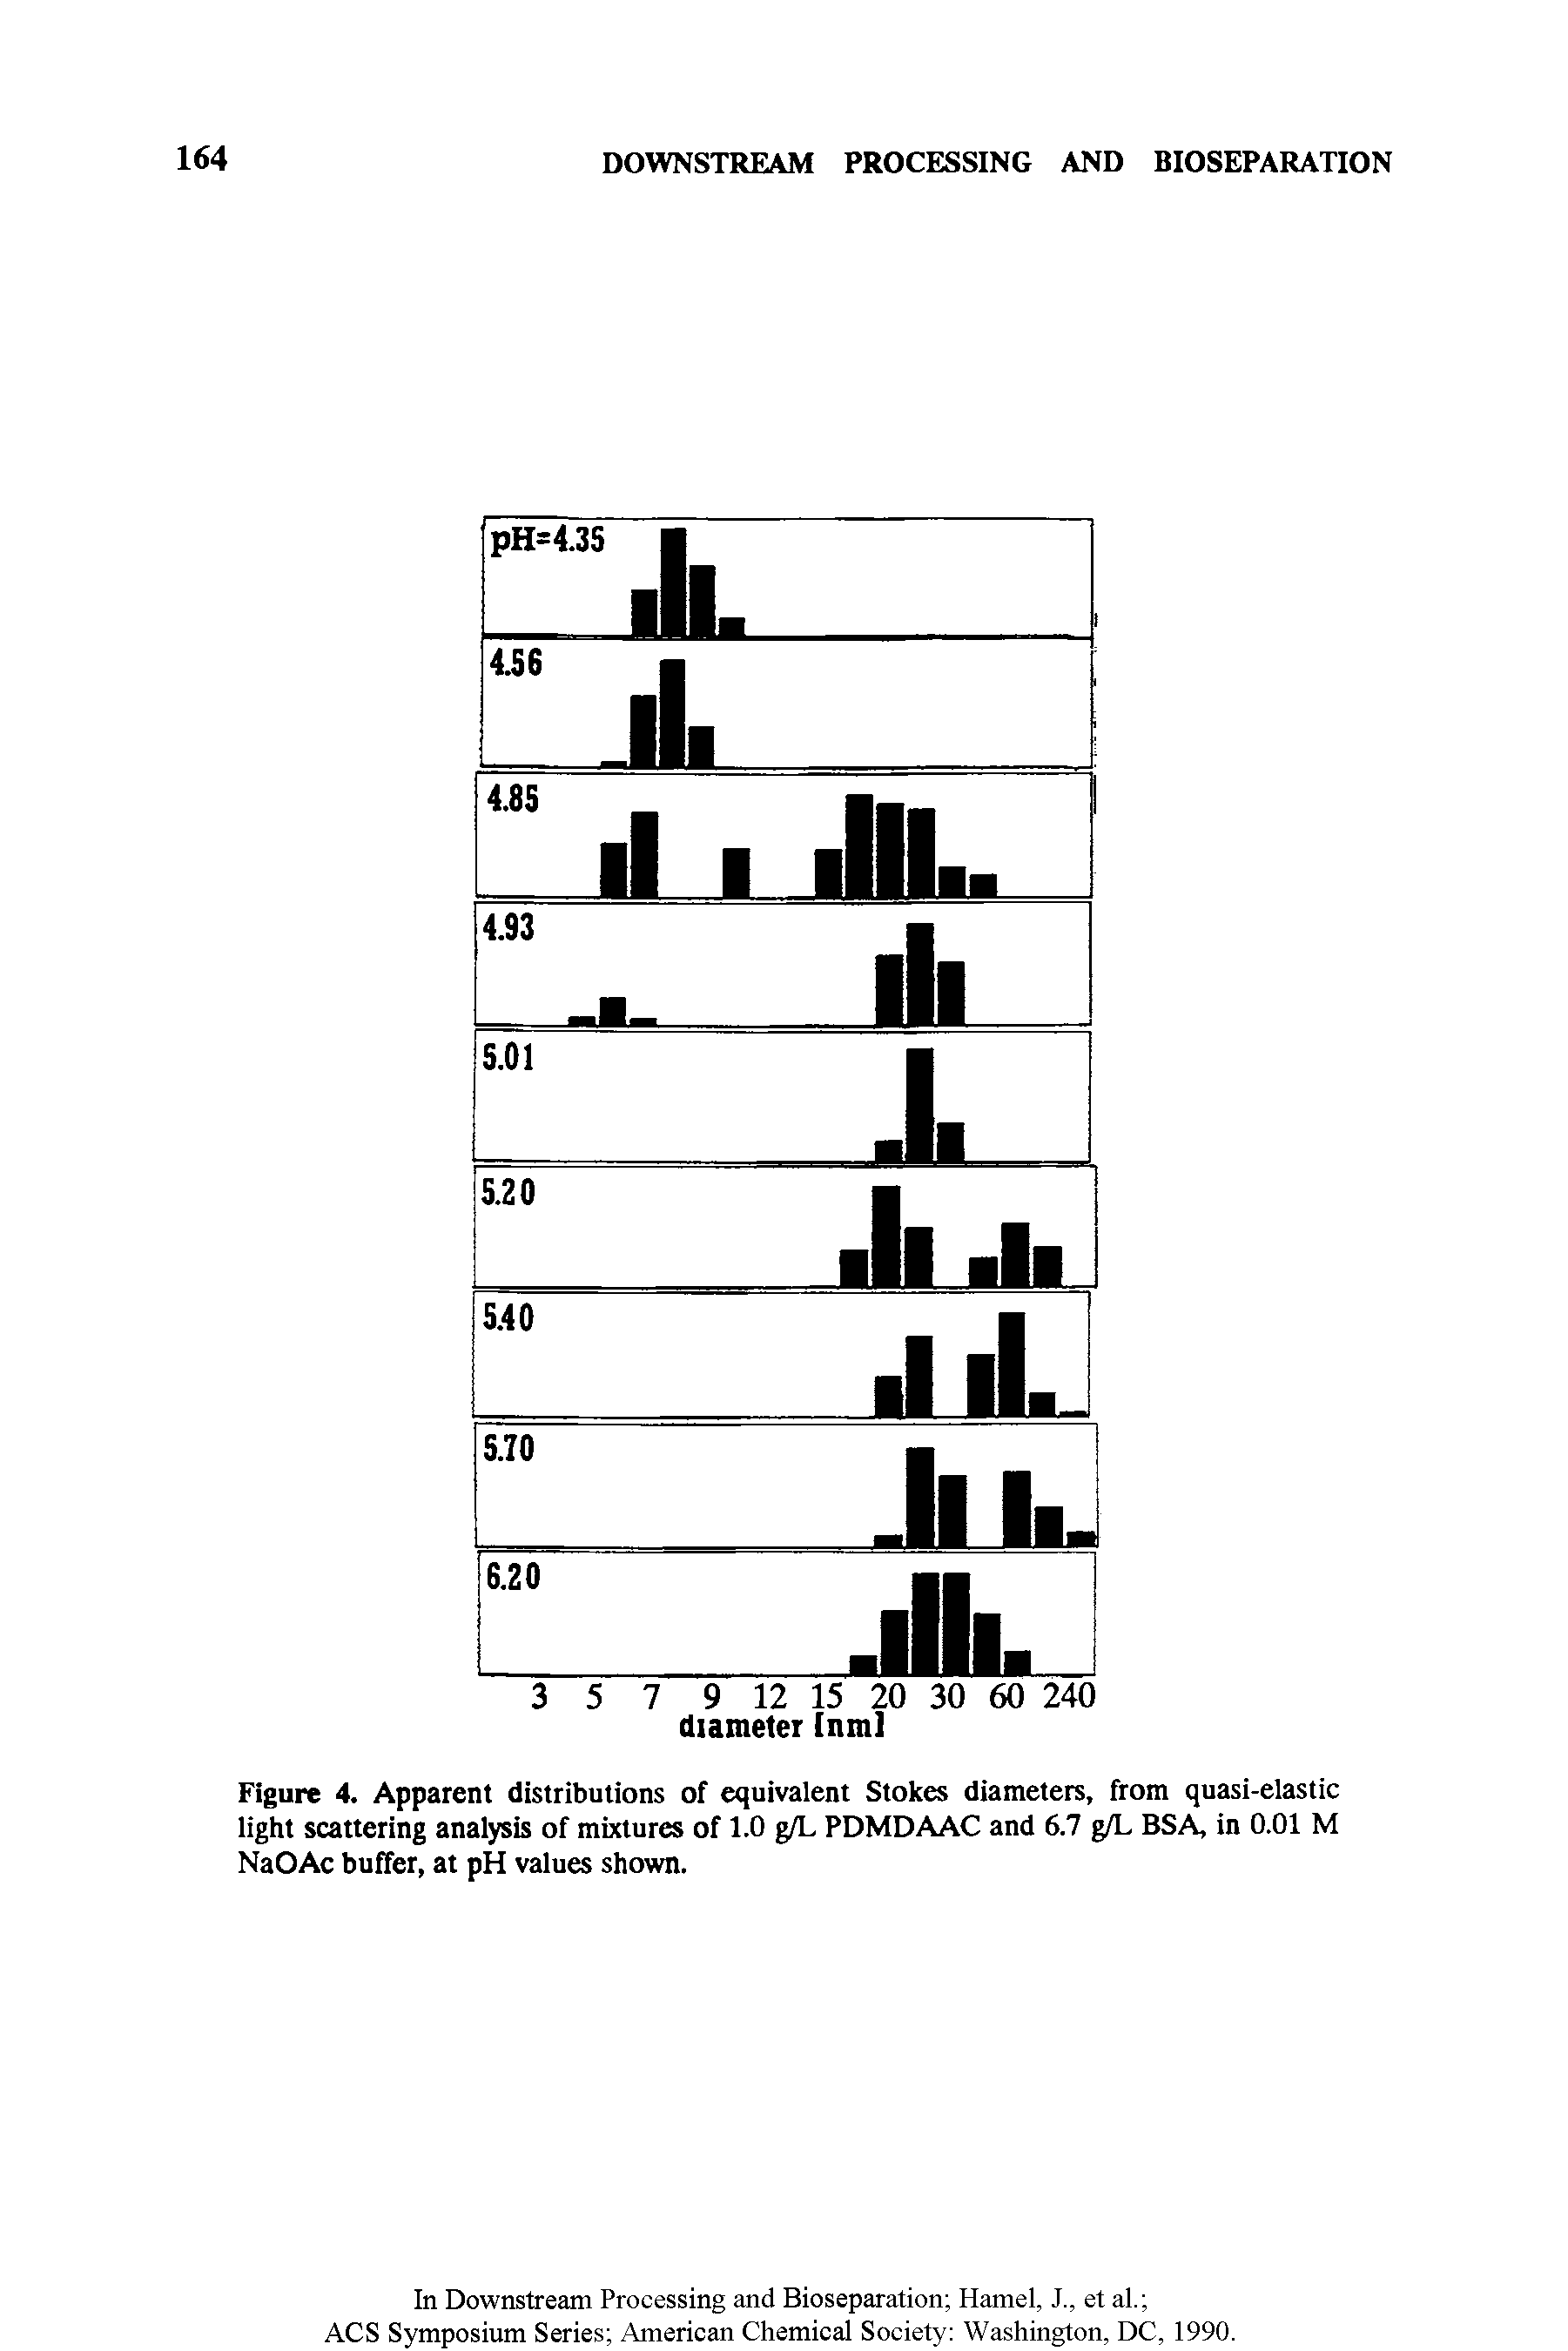 Figure 4. Apparent distributions of equivalent Stokes diameters, from quasi-elastic light scattering analysis of mixtures of 1.0 g/L PDMDAAC and 6.7 g/L BSA, in 0.01 M NaOAc buffer, at pH values shown.